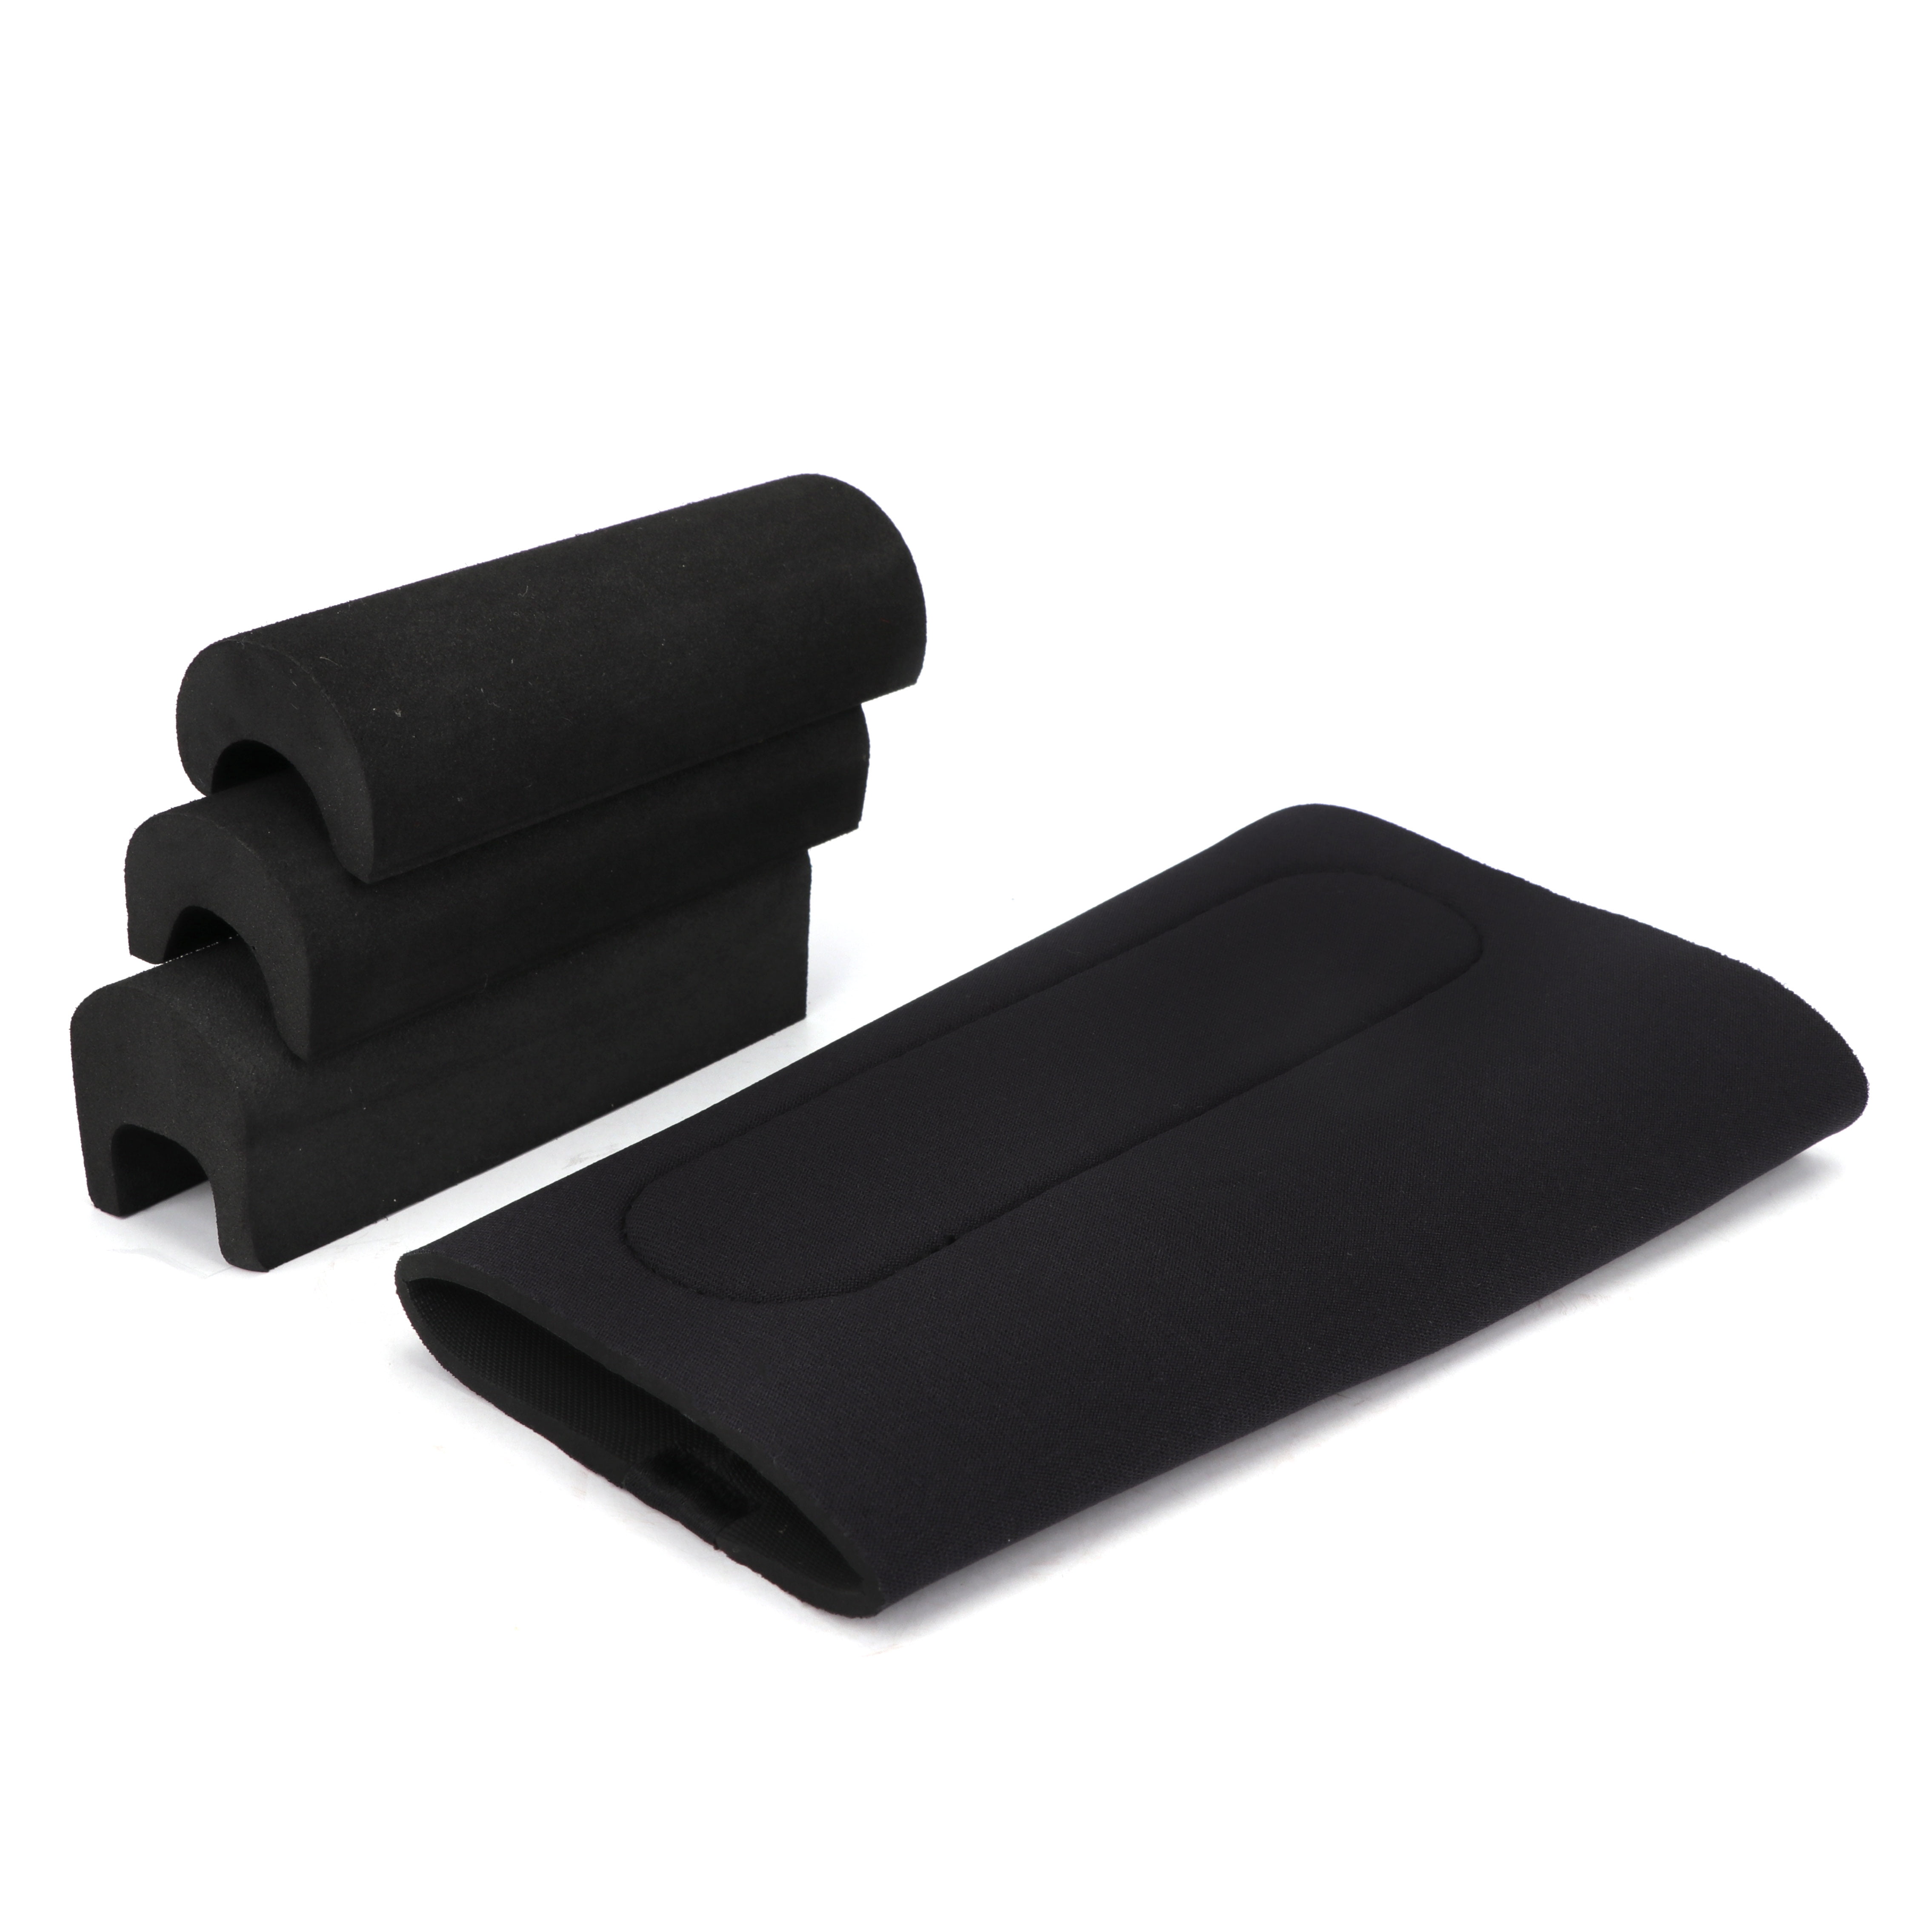 Details about   Tourbon Comb Riser Adjusted Cheek Rest Kits Slip-on Neoprene Rifle Stock Cover 